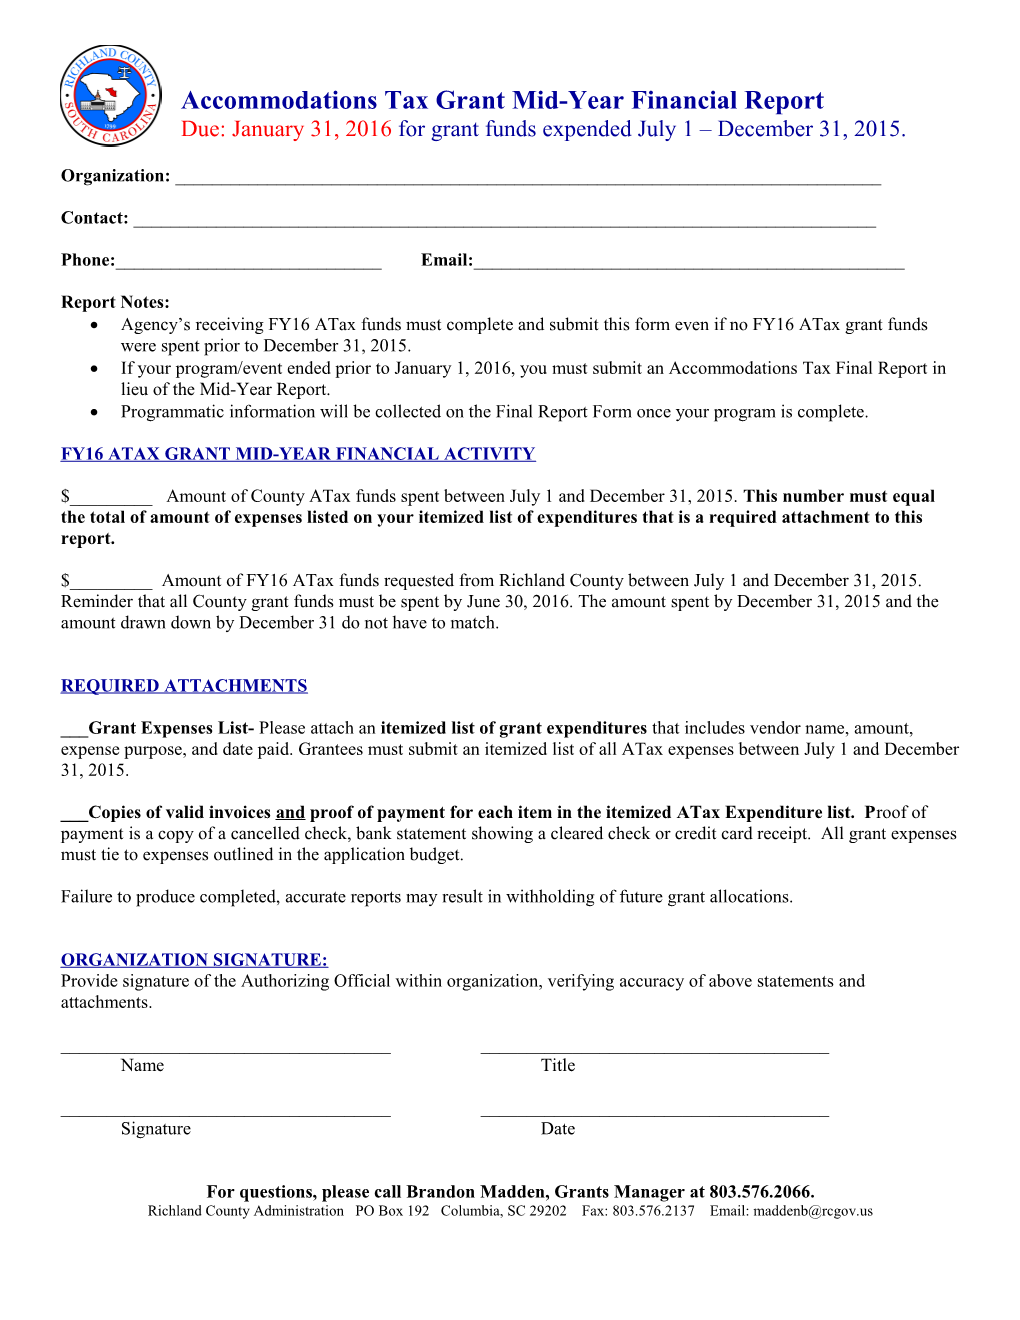 Hospitality Tax Grant Payment Request Form s1